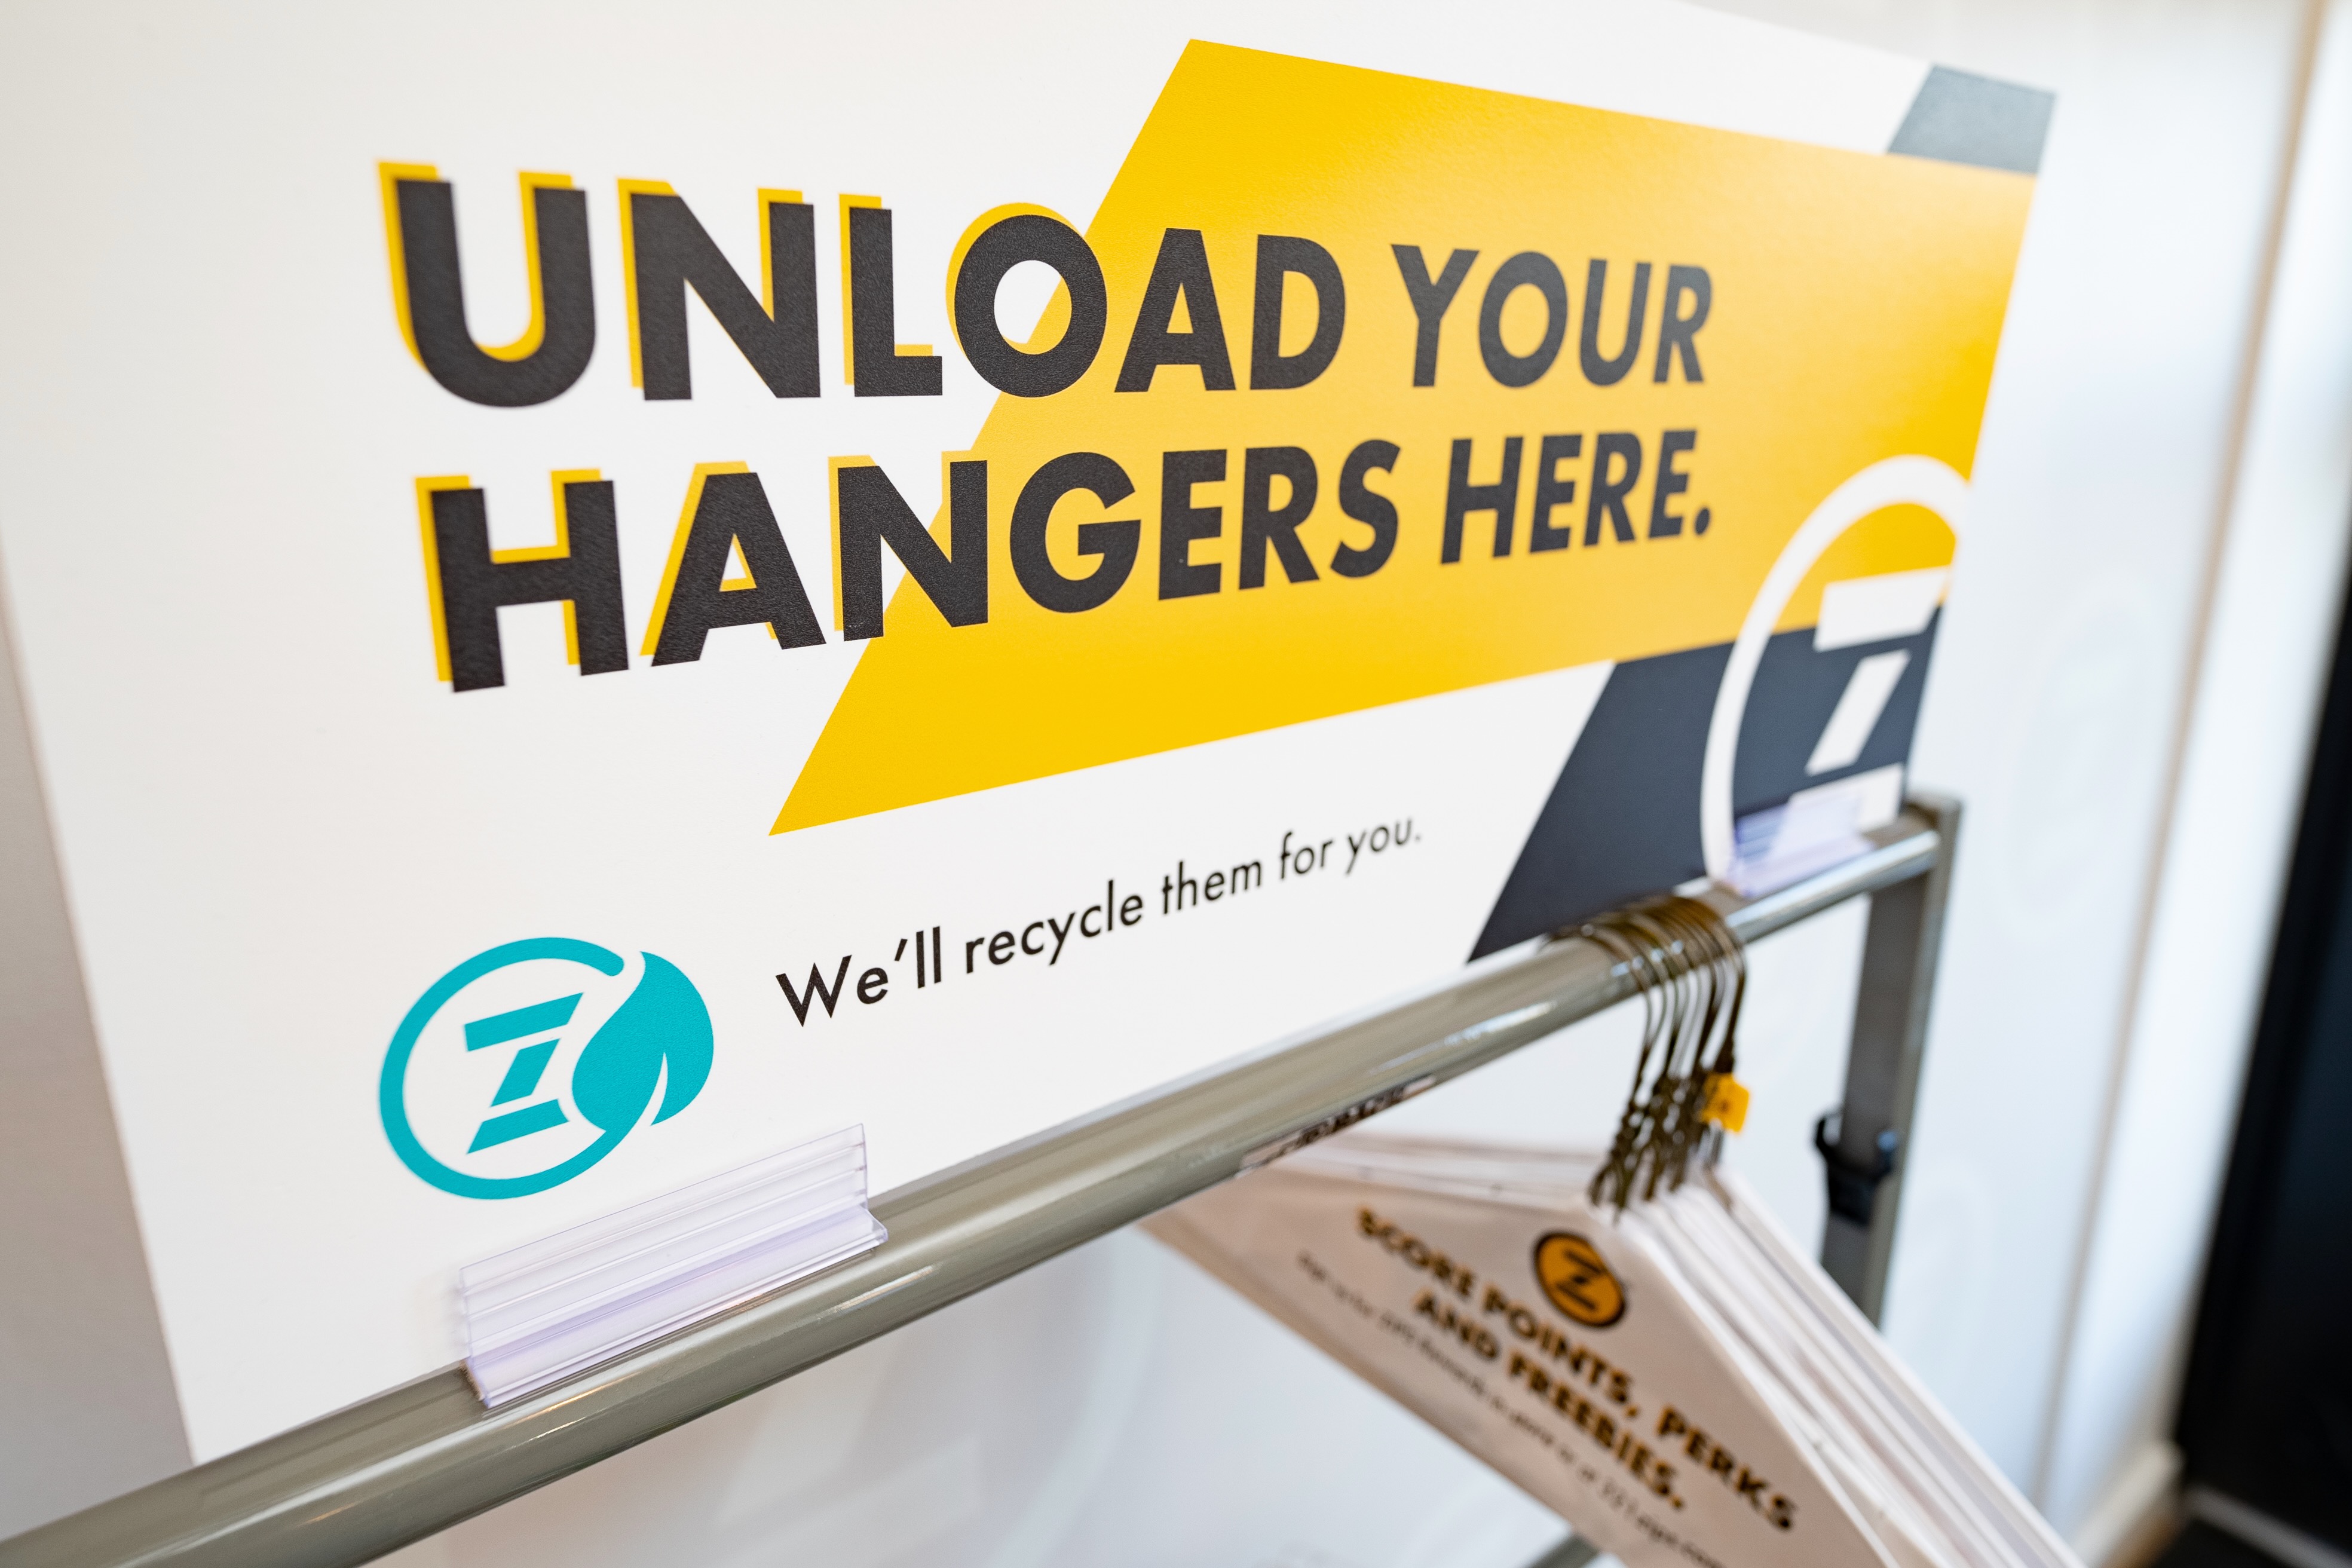 ZIPS Cleaners makes it easy to recycle your unwanted hangers. Just bring them in and hang them on our handy front-of-store rack under our sign “Unload your hangers here. We’ll recycle them for you.”